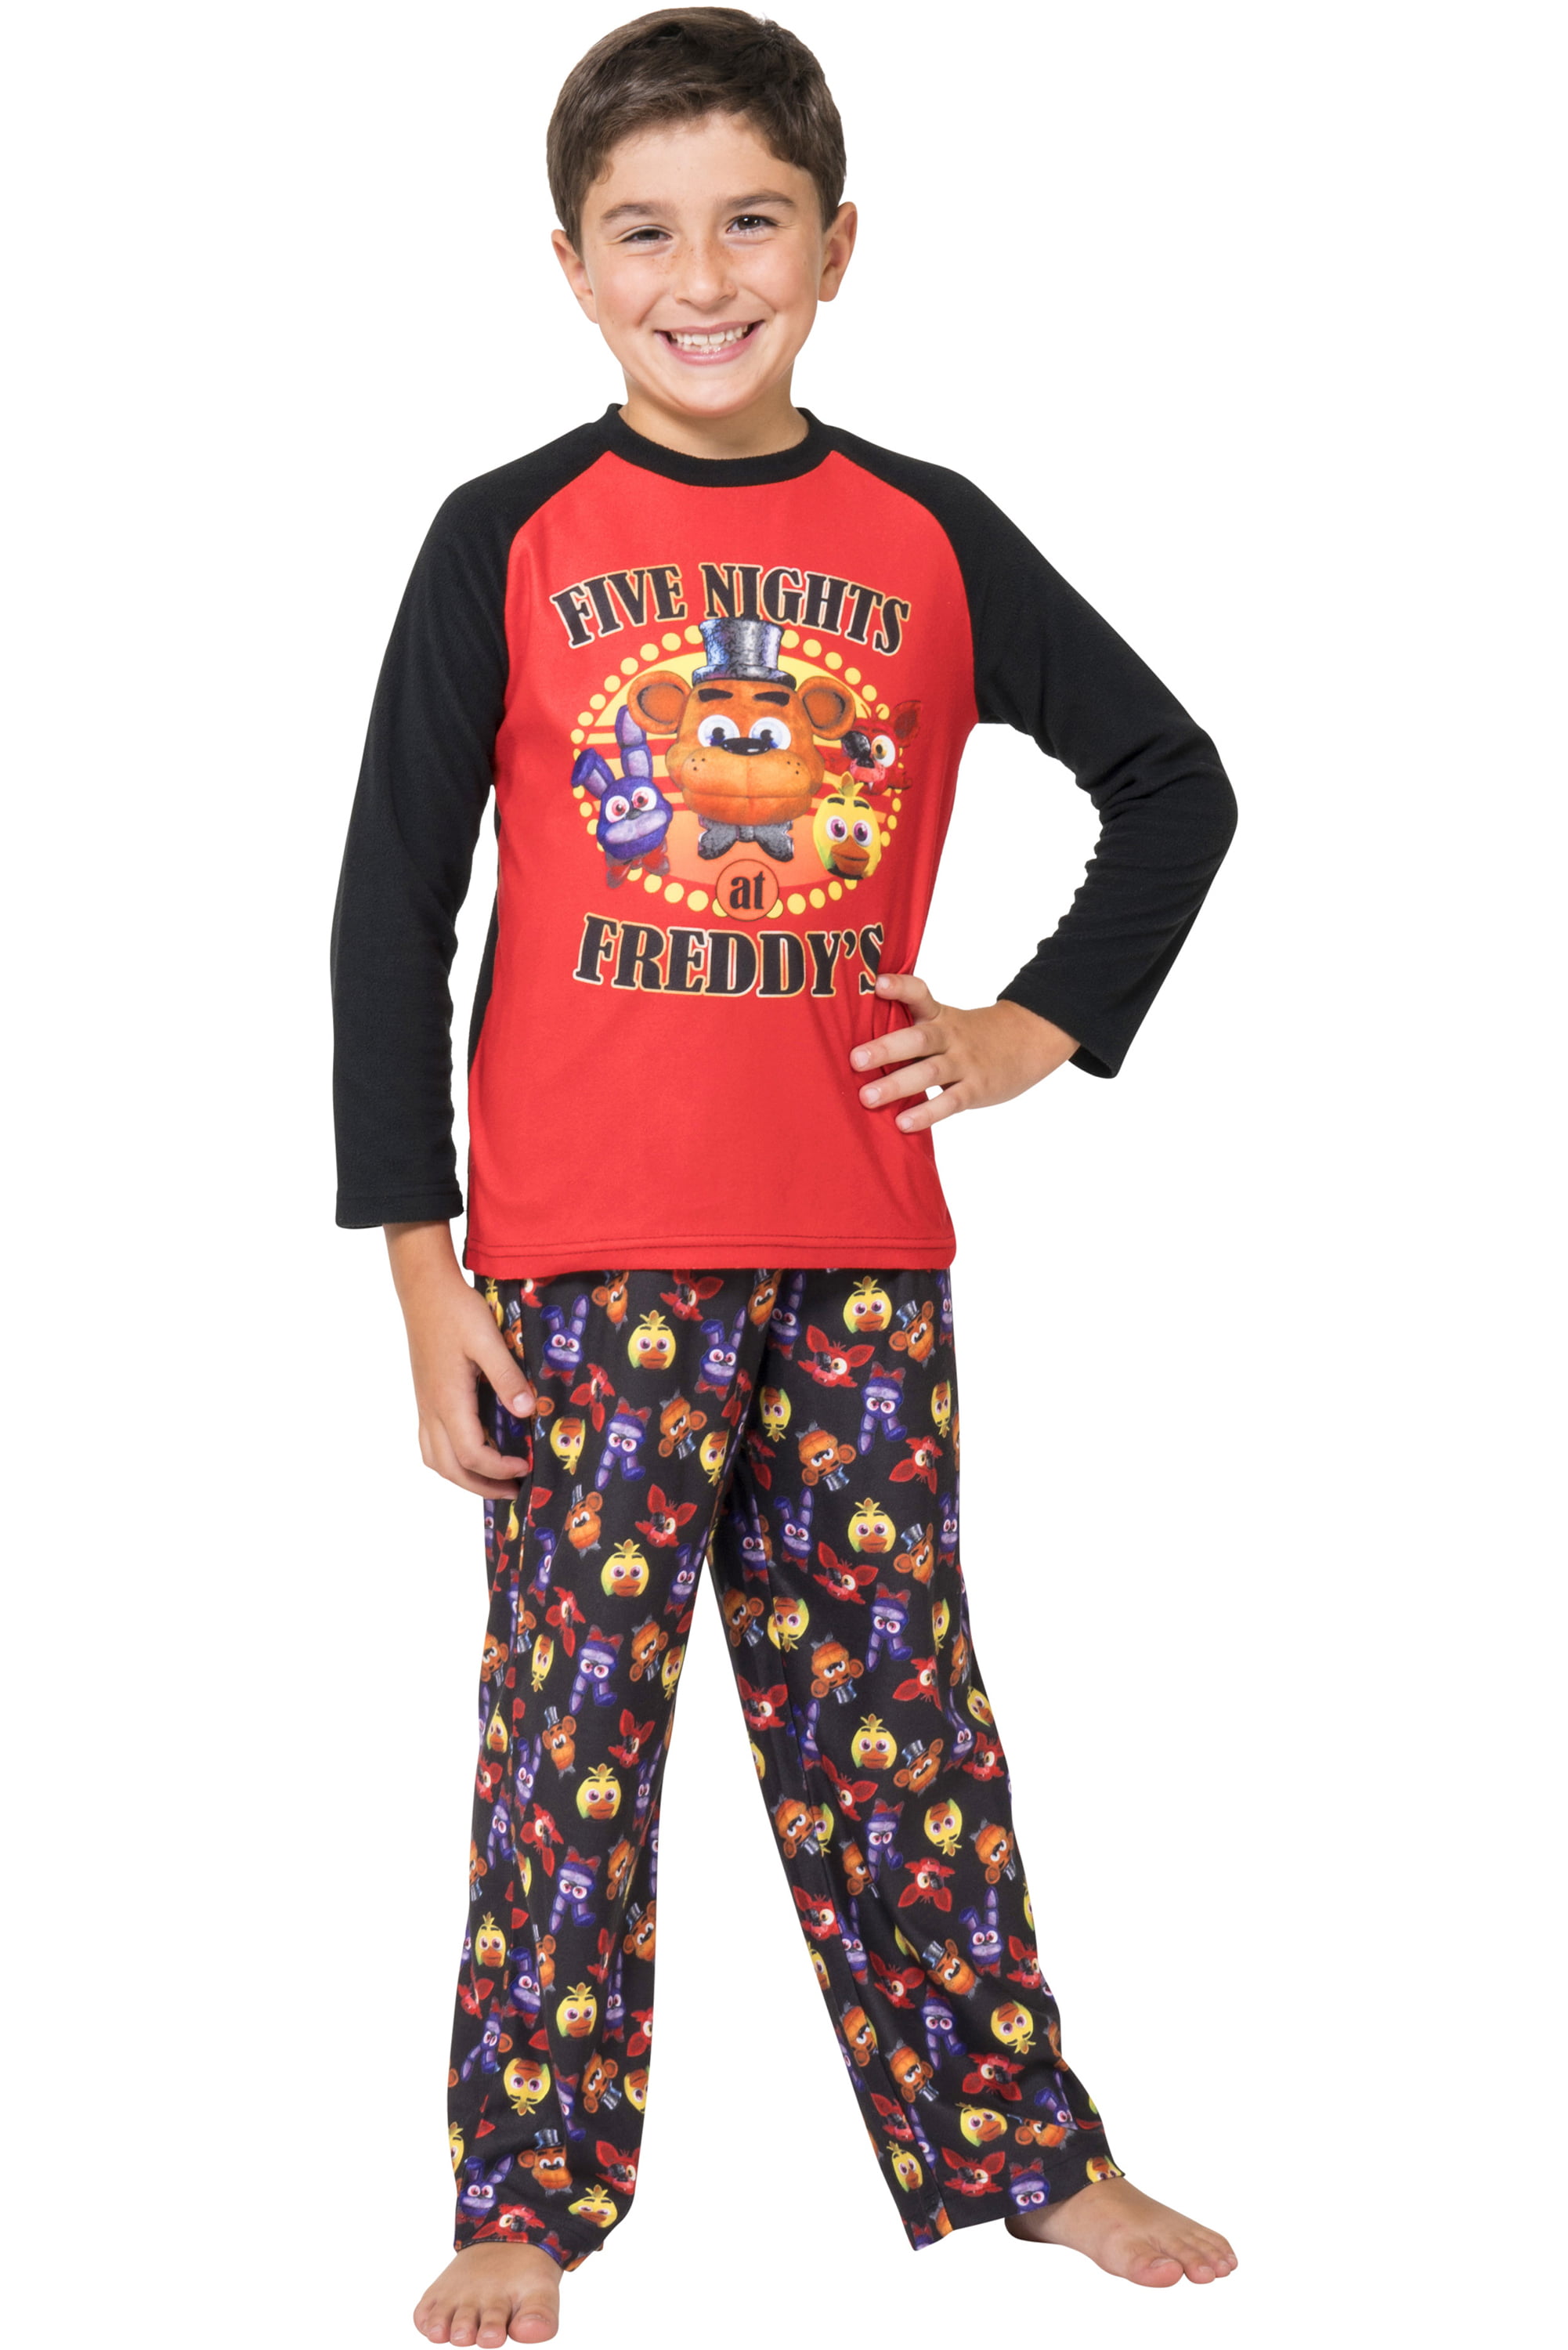 Game Over Five Night's At Freddy's Boys Sleepwear Shirt & Pants LARGE 10-12 